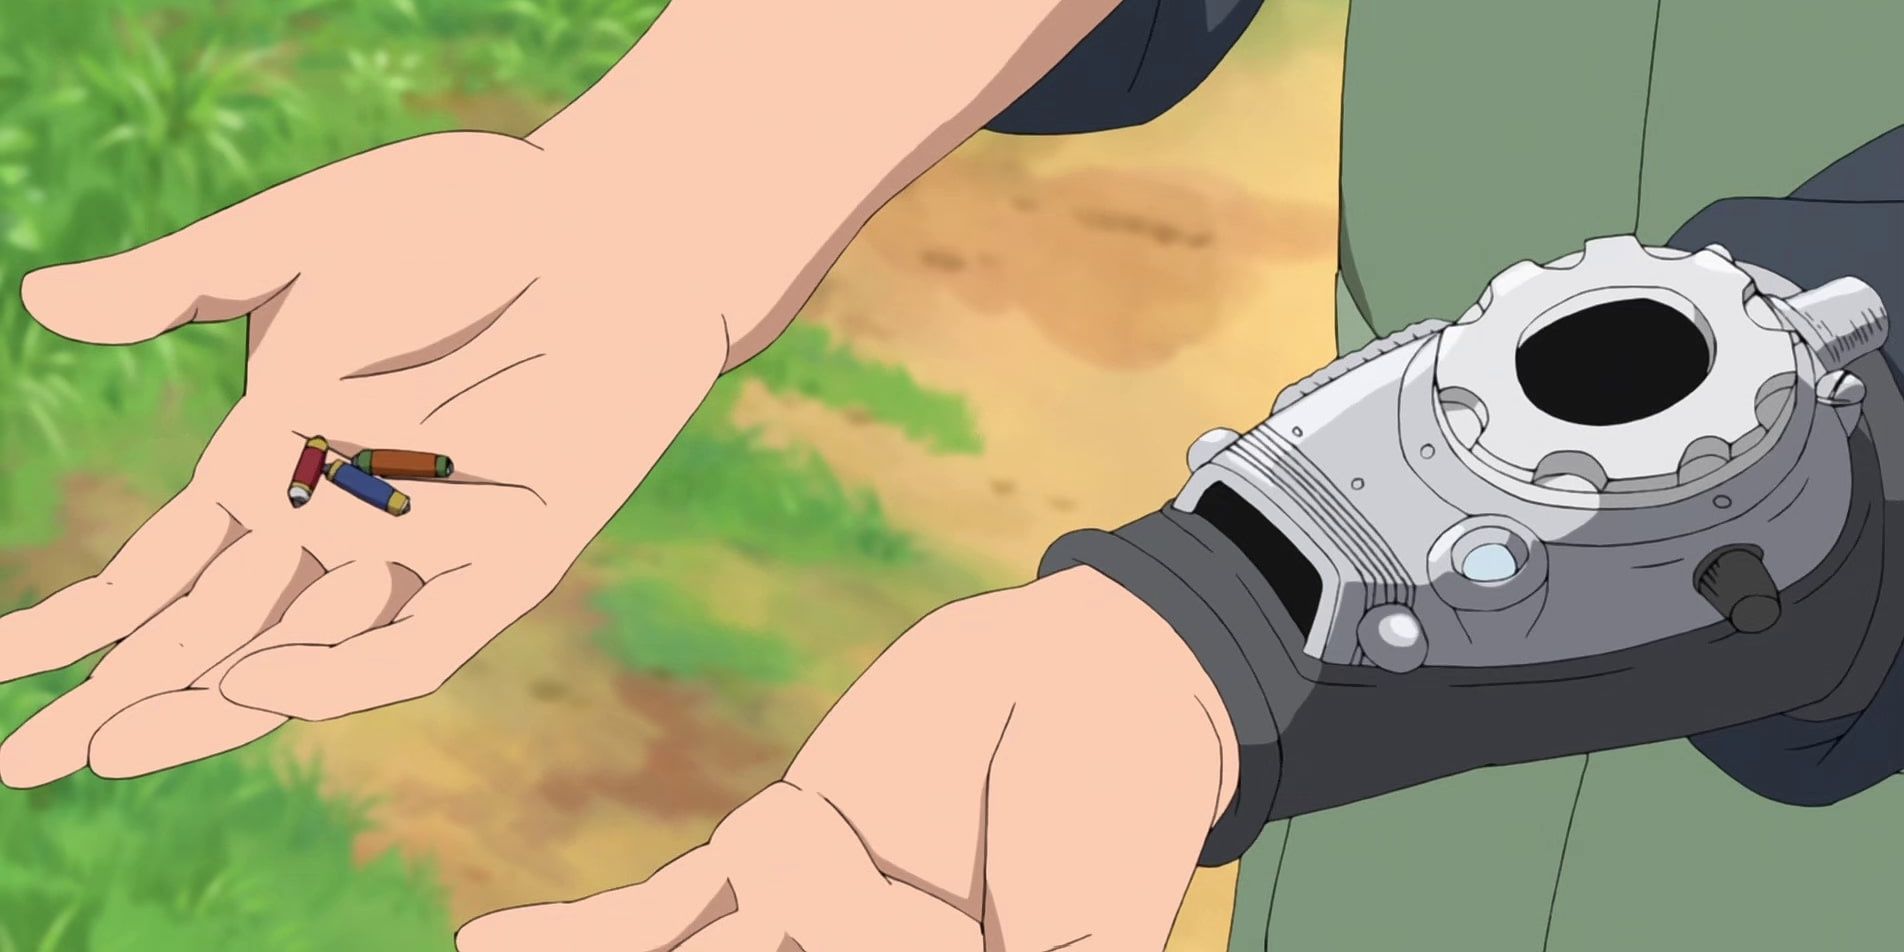 Naruto 10 Strongest Ninja Tools That Are Never Used